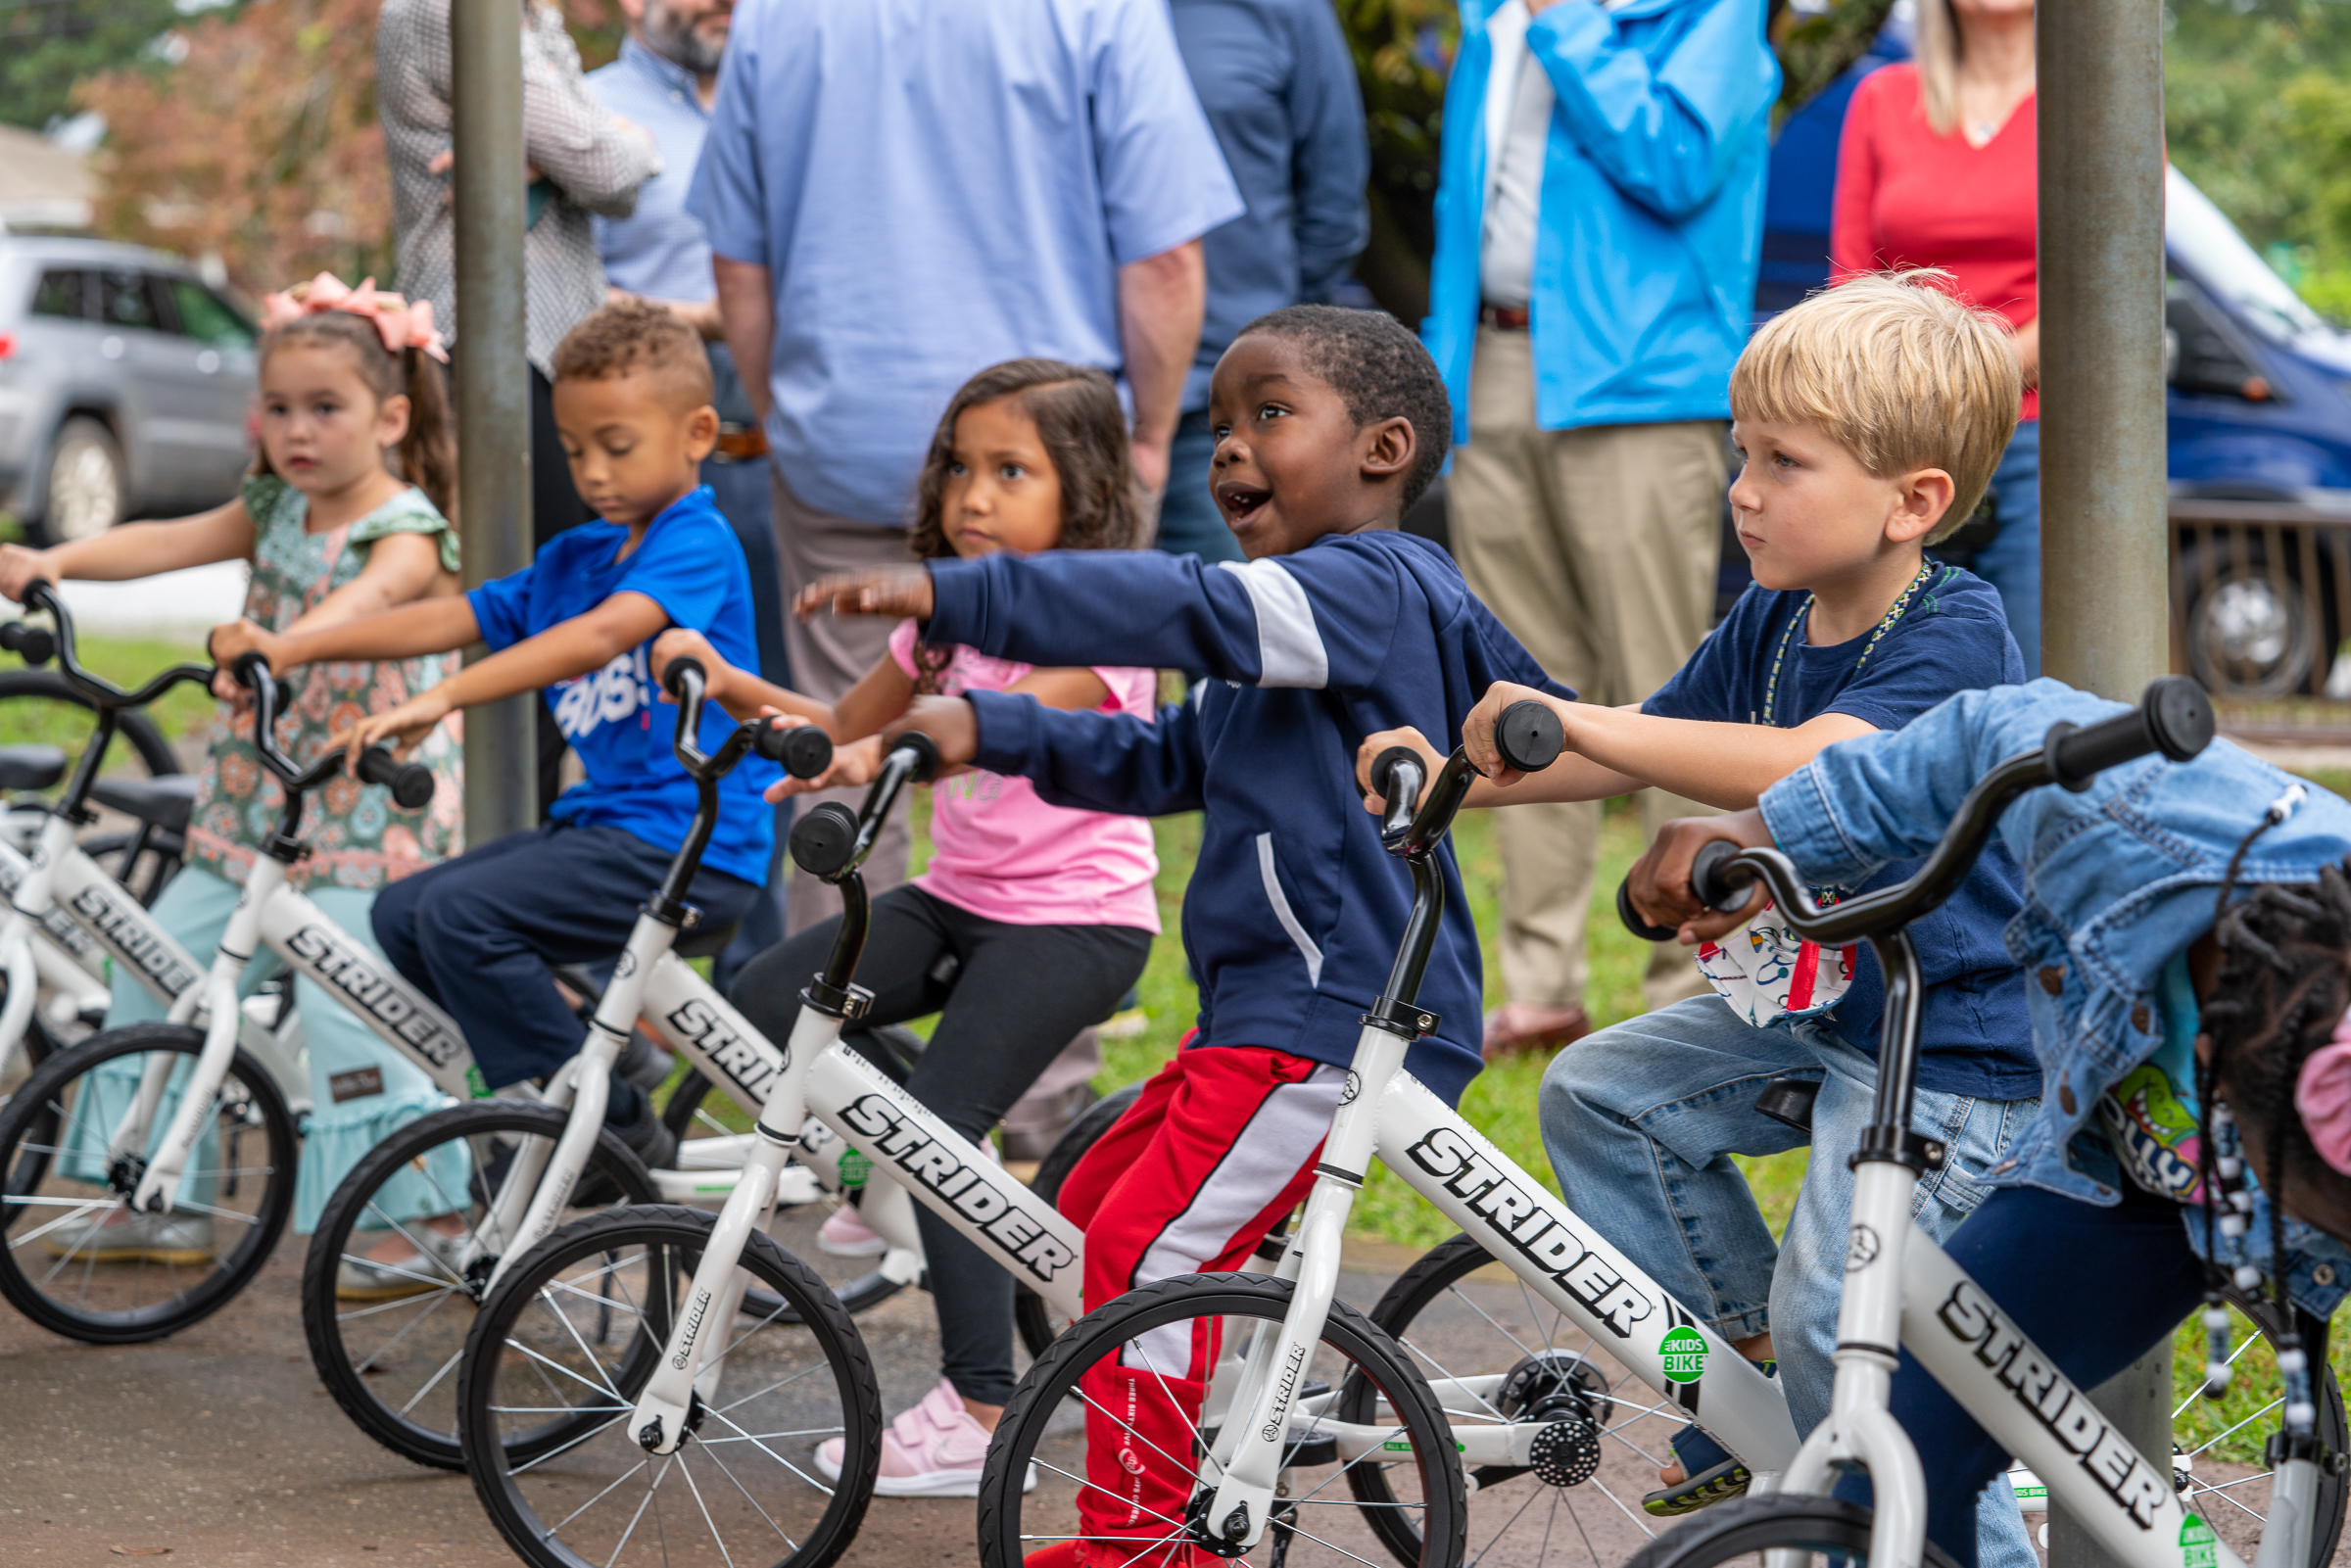 Children Ride Donated Bikes for the First Time